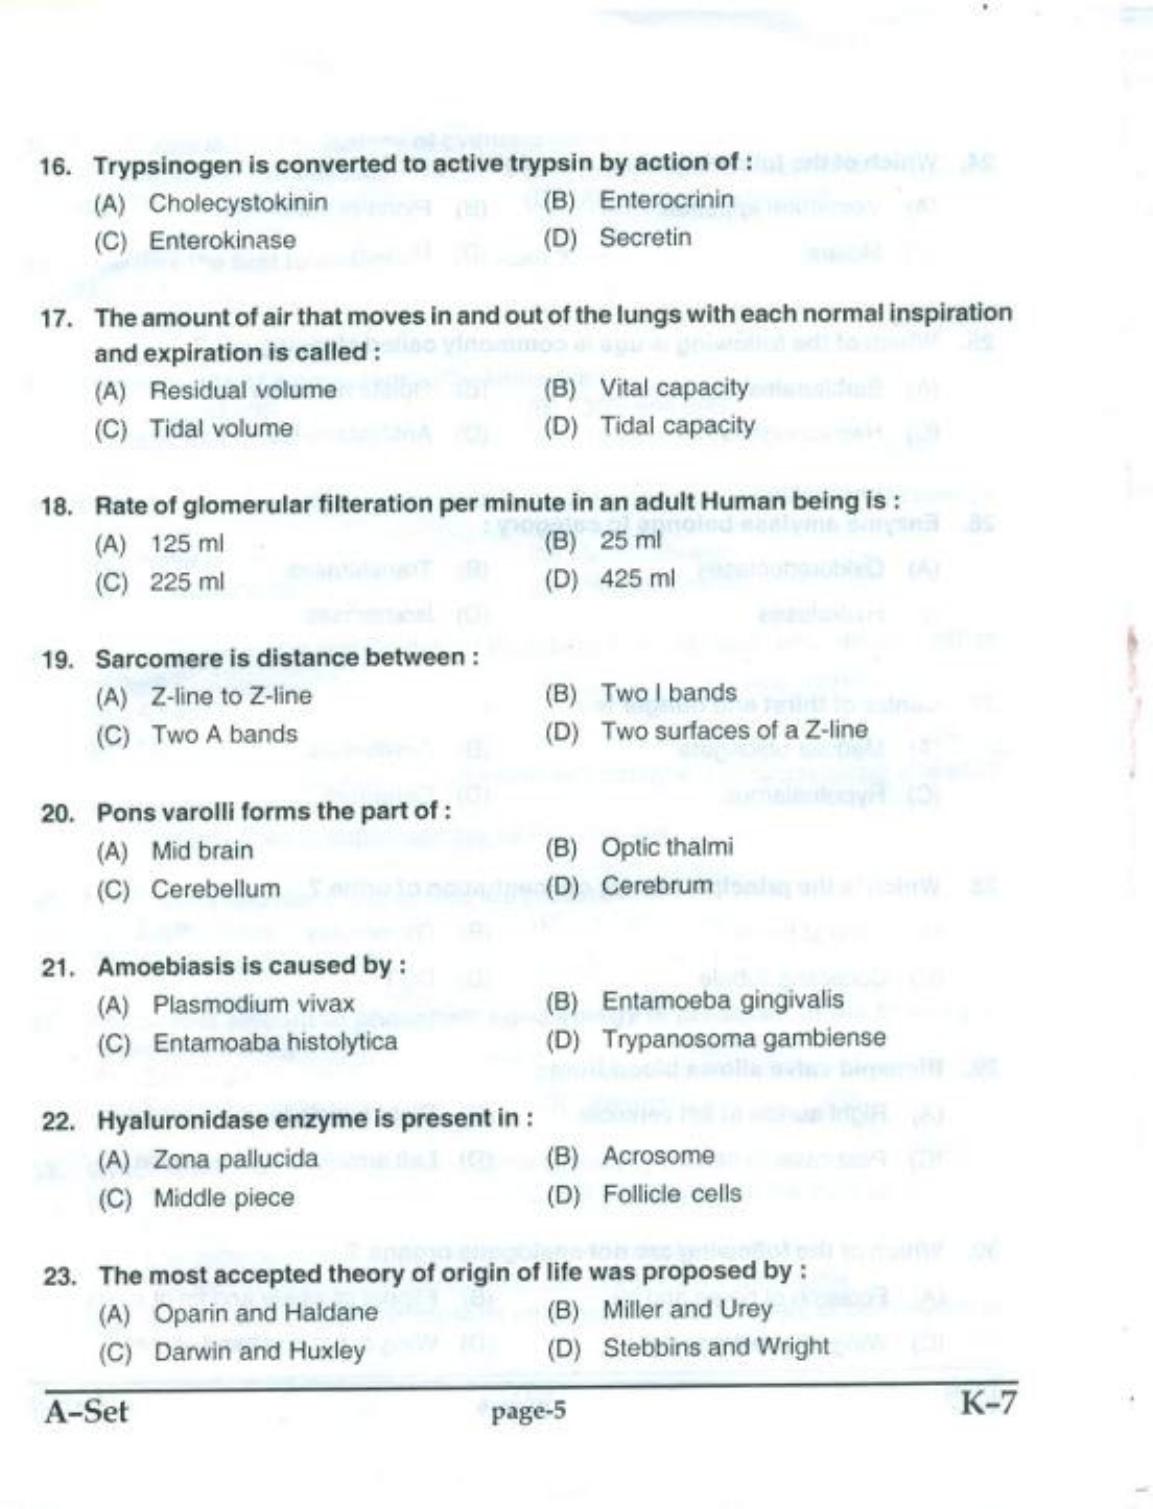 PUCET UG 2017 Biology Question Paper - Page 4